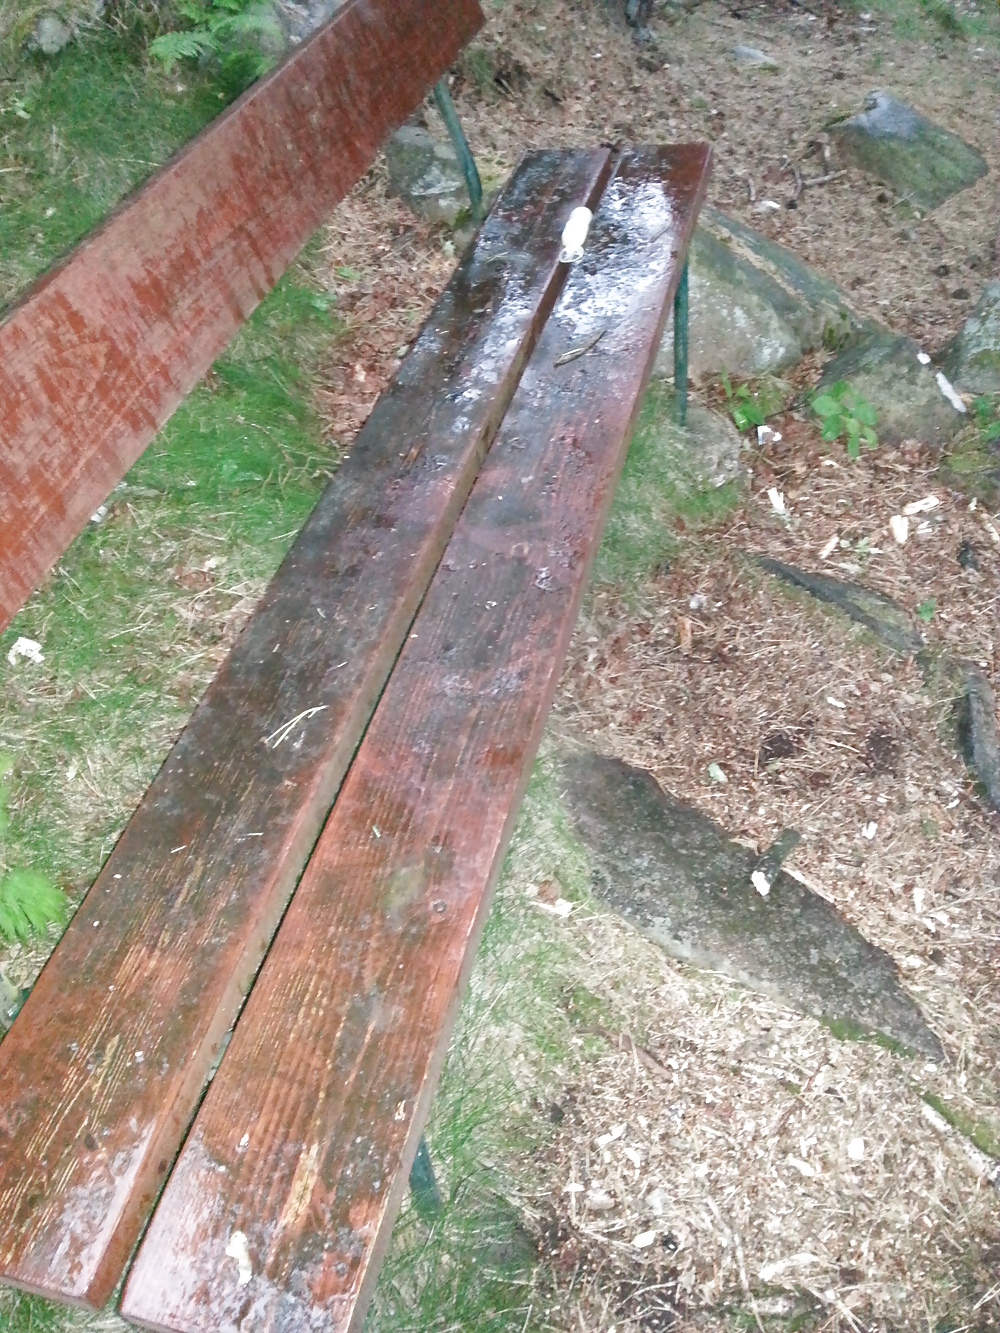 My Cum Of 13 Loads In A Condom On A Bench In A Park! #19075084